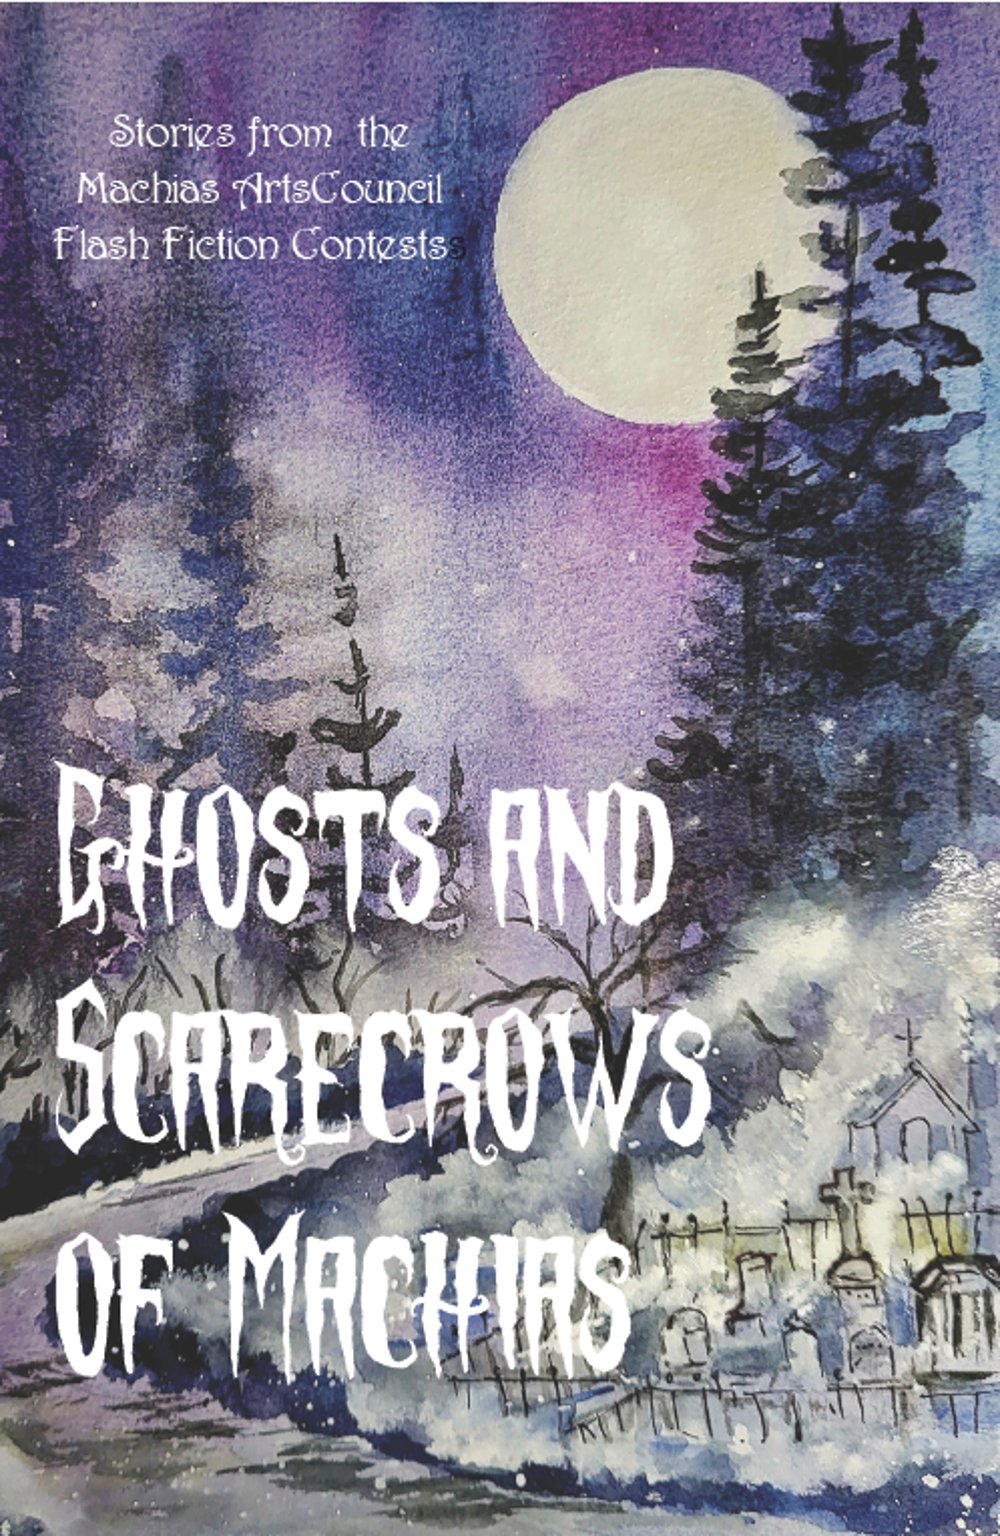 Cover of the Ghosts and Scarecrows of Machias book.